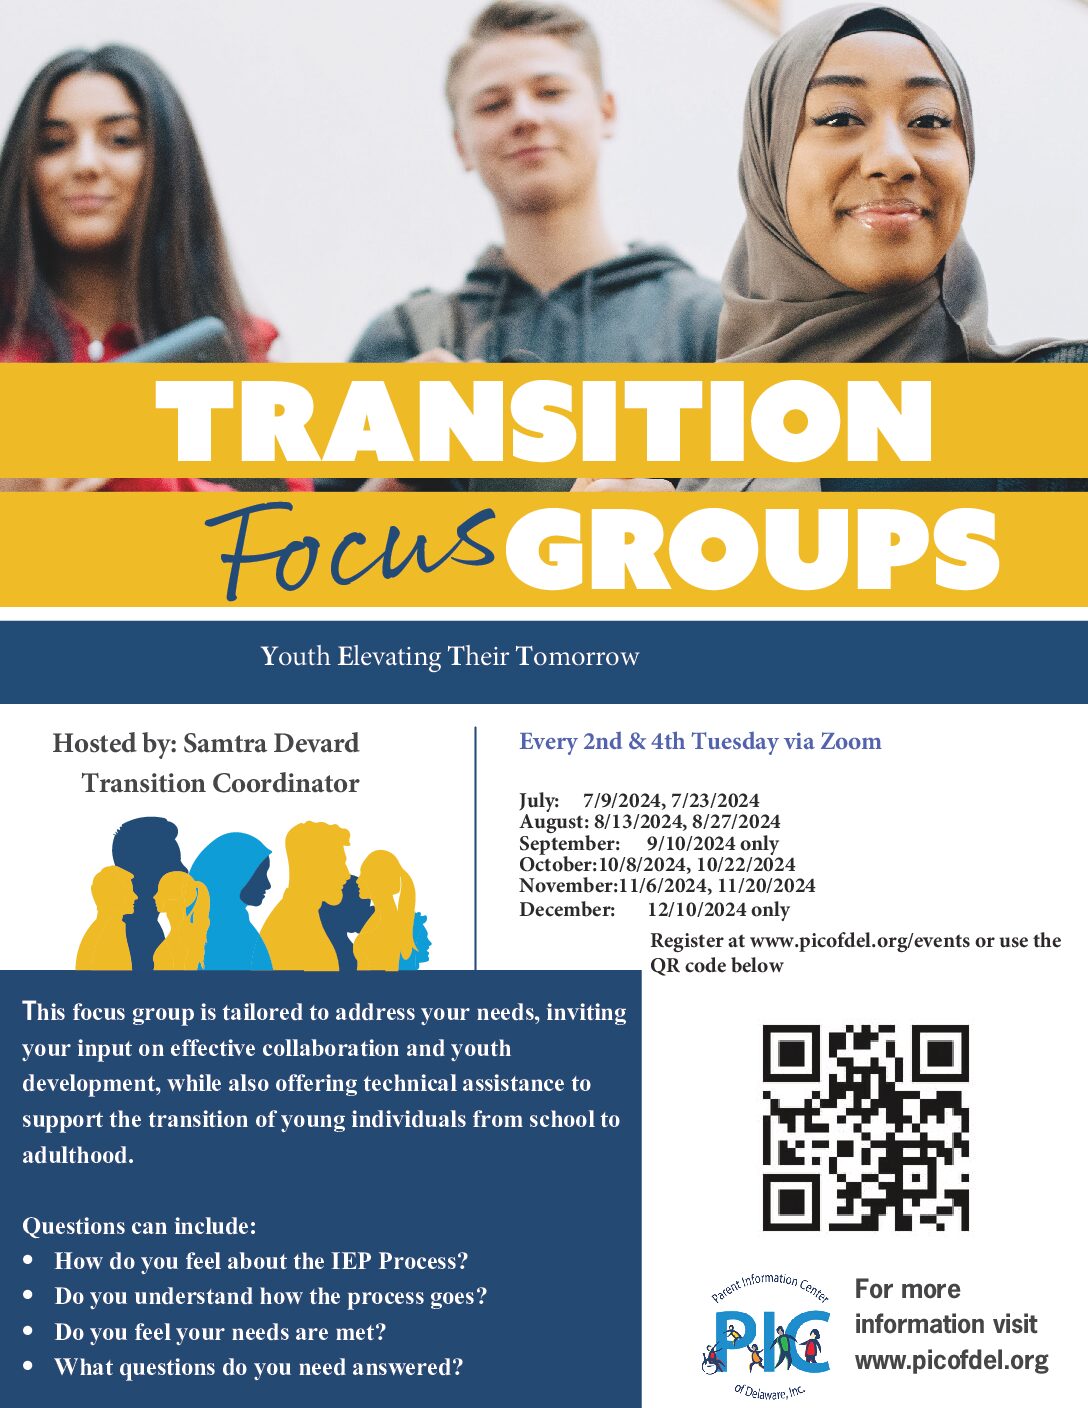 Transition Focus Group